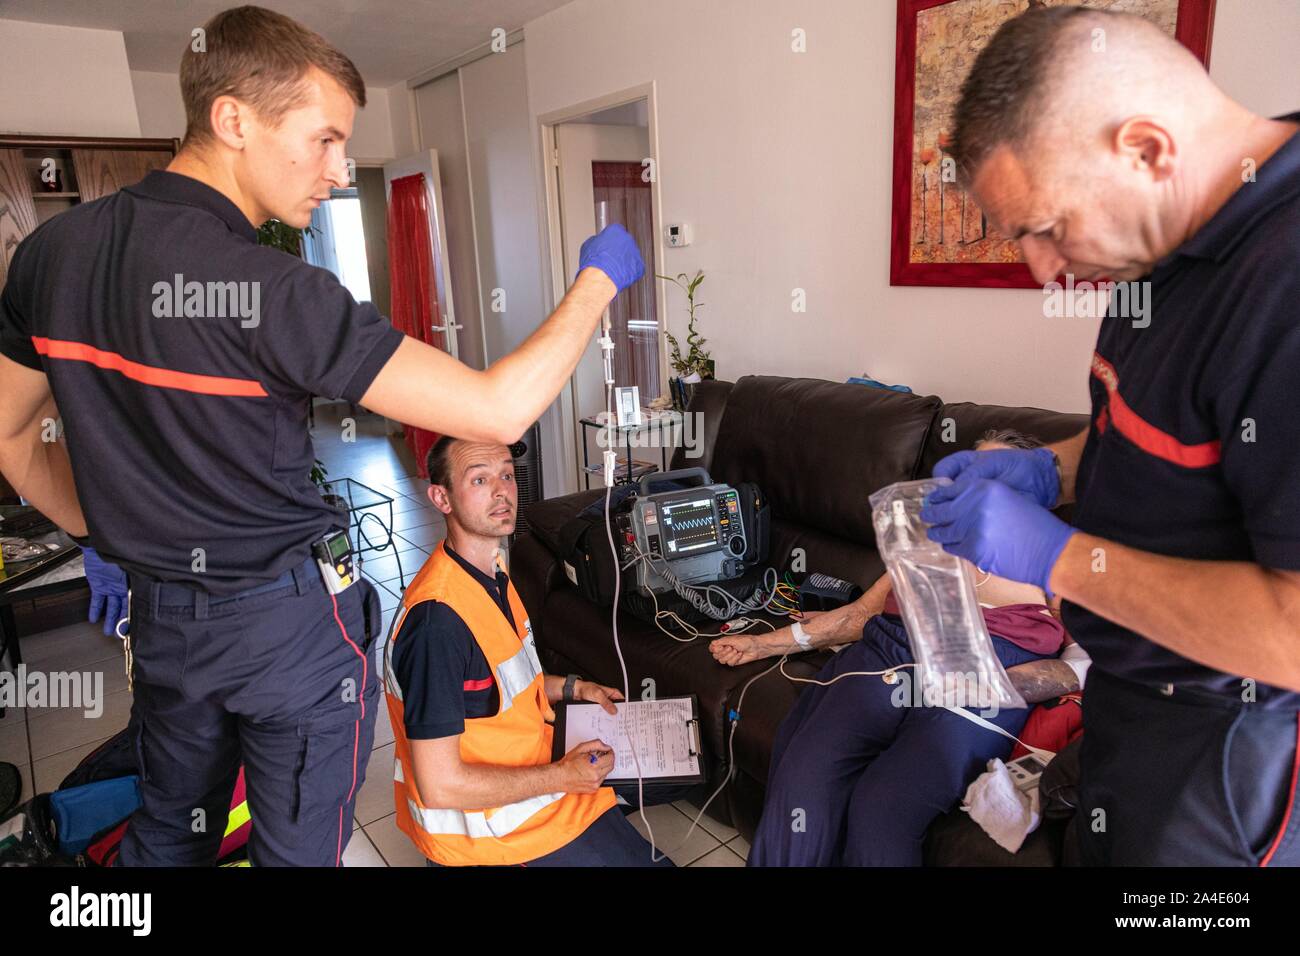 INSERTING AN INTRAVENOUS DRIP, FIREFIGHTERS FROM THE EMERGENCY RESCUE SERVICES IN ROANNE, LOIRE, FRANCE Stock Photo